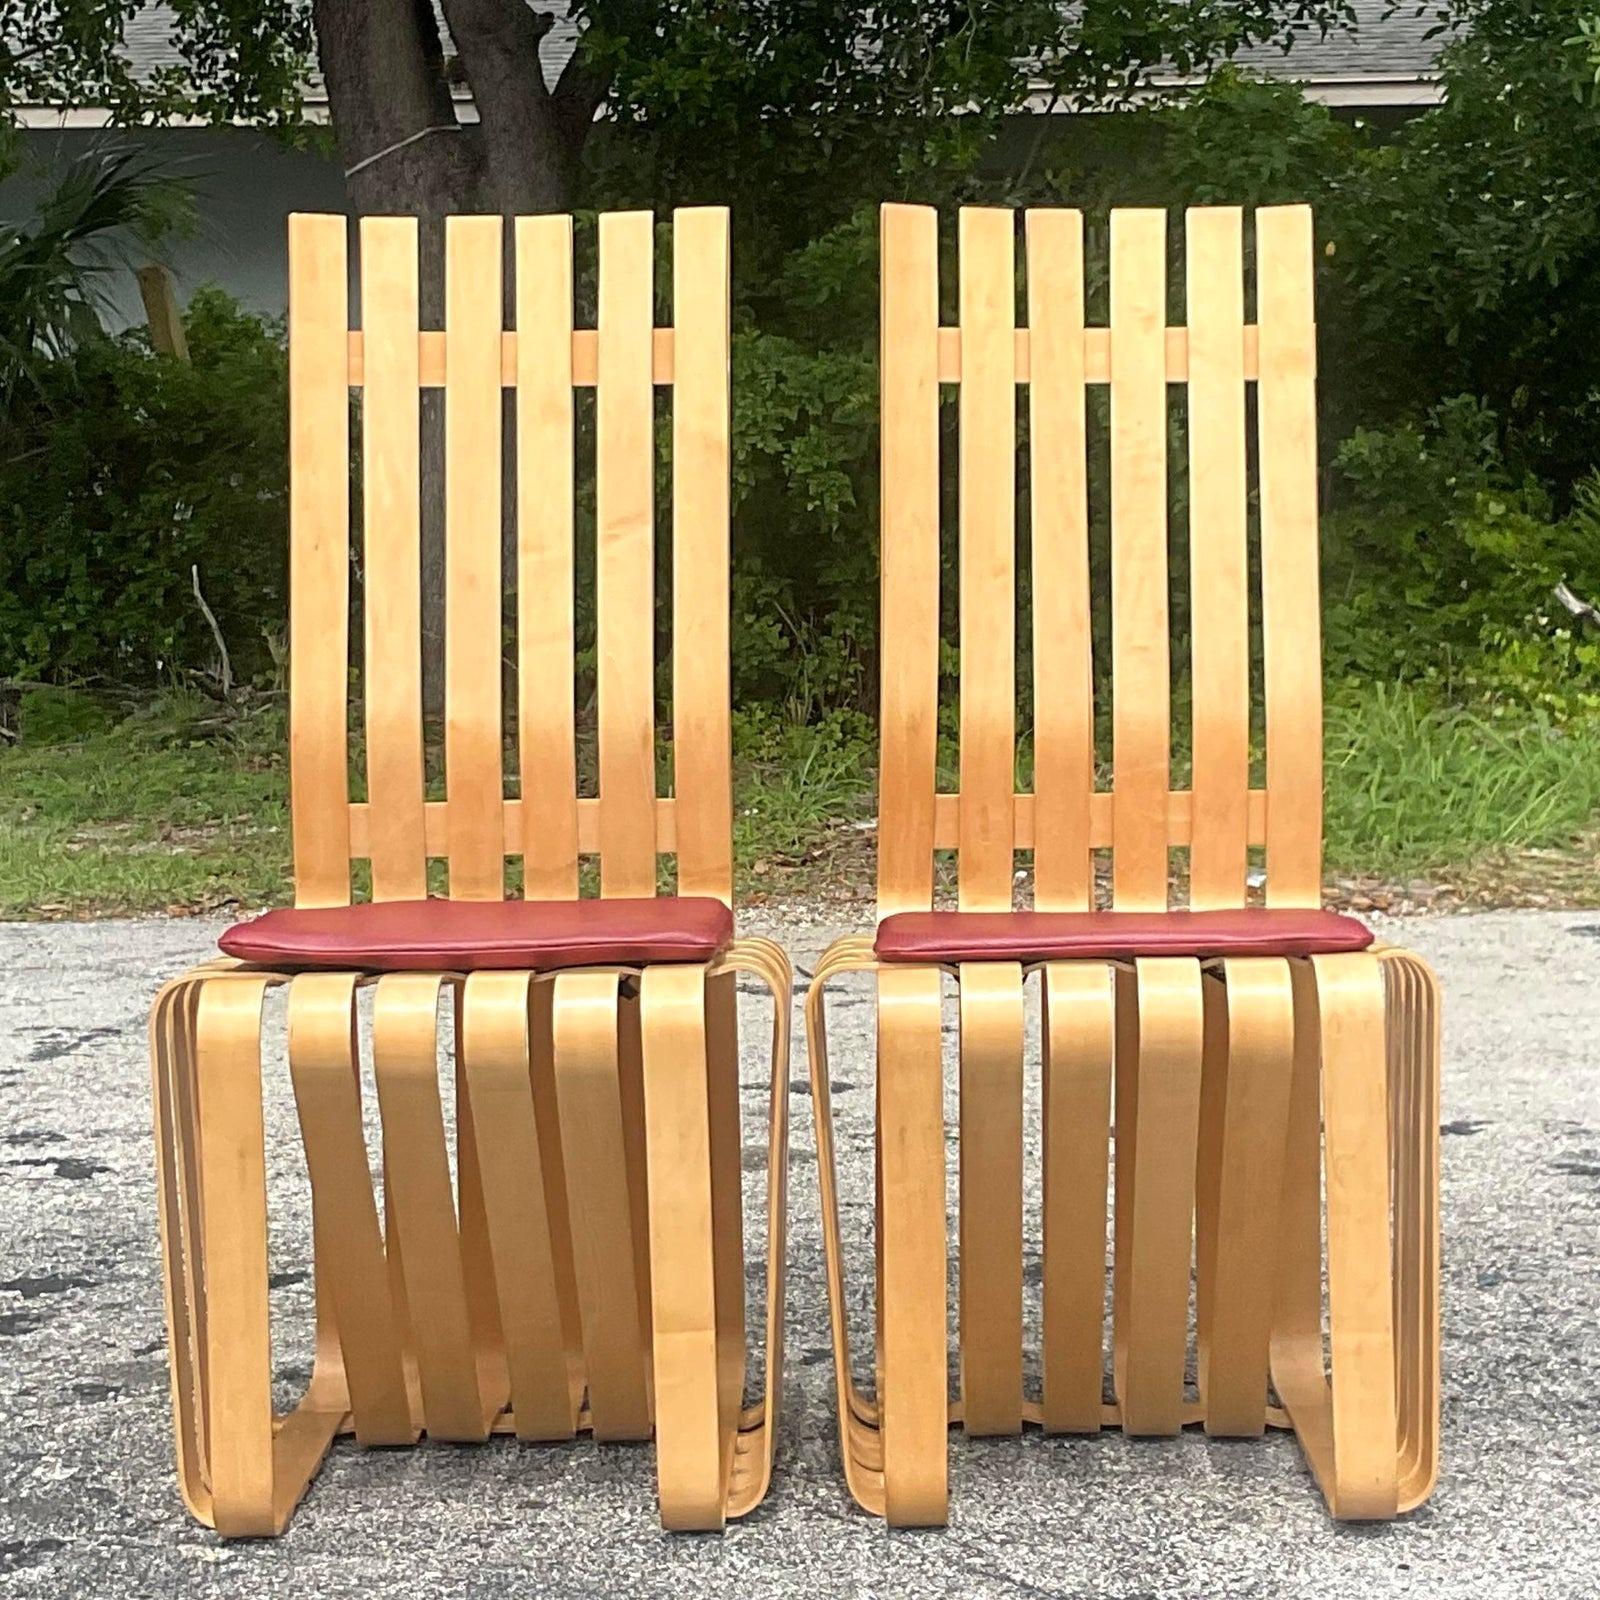 Vintage Contemporary Signed Frank Gehry for Knoll “High Sticking” Chair - a Pair For Sale 4